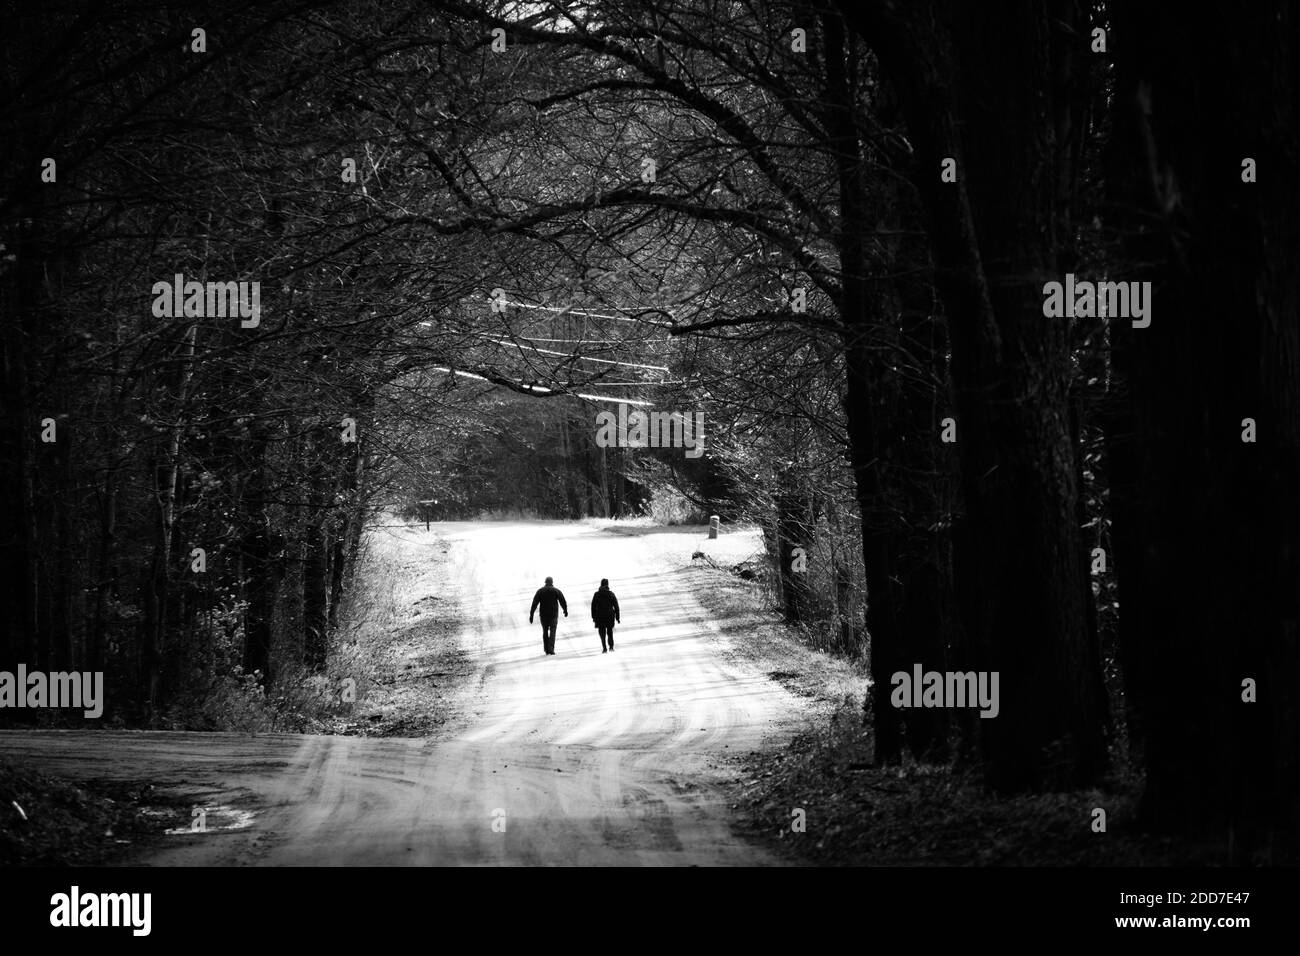 A couple are silhouetted as they walk on a rural dirt road, East Montpelier, VT, New England, USA. Stock Photo